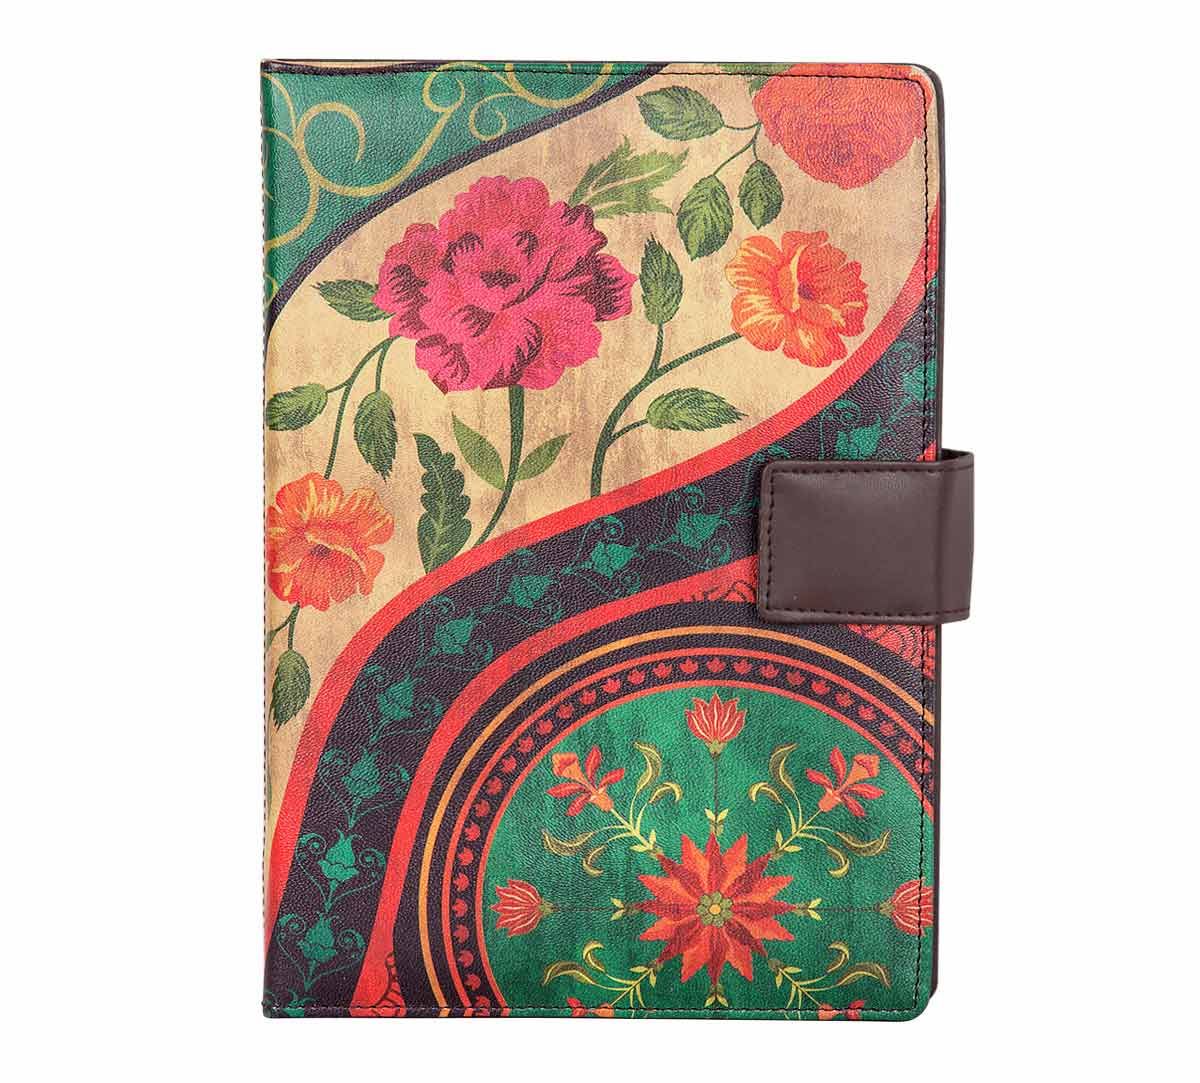 India Circus Floral Embroidery Notebook Planner